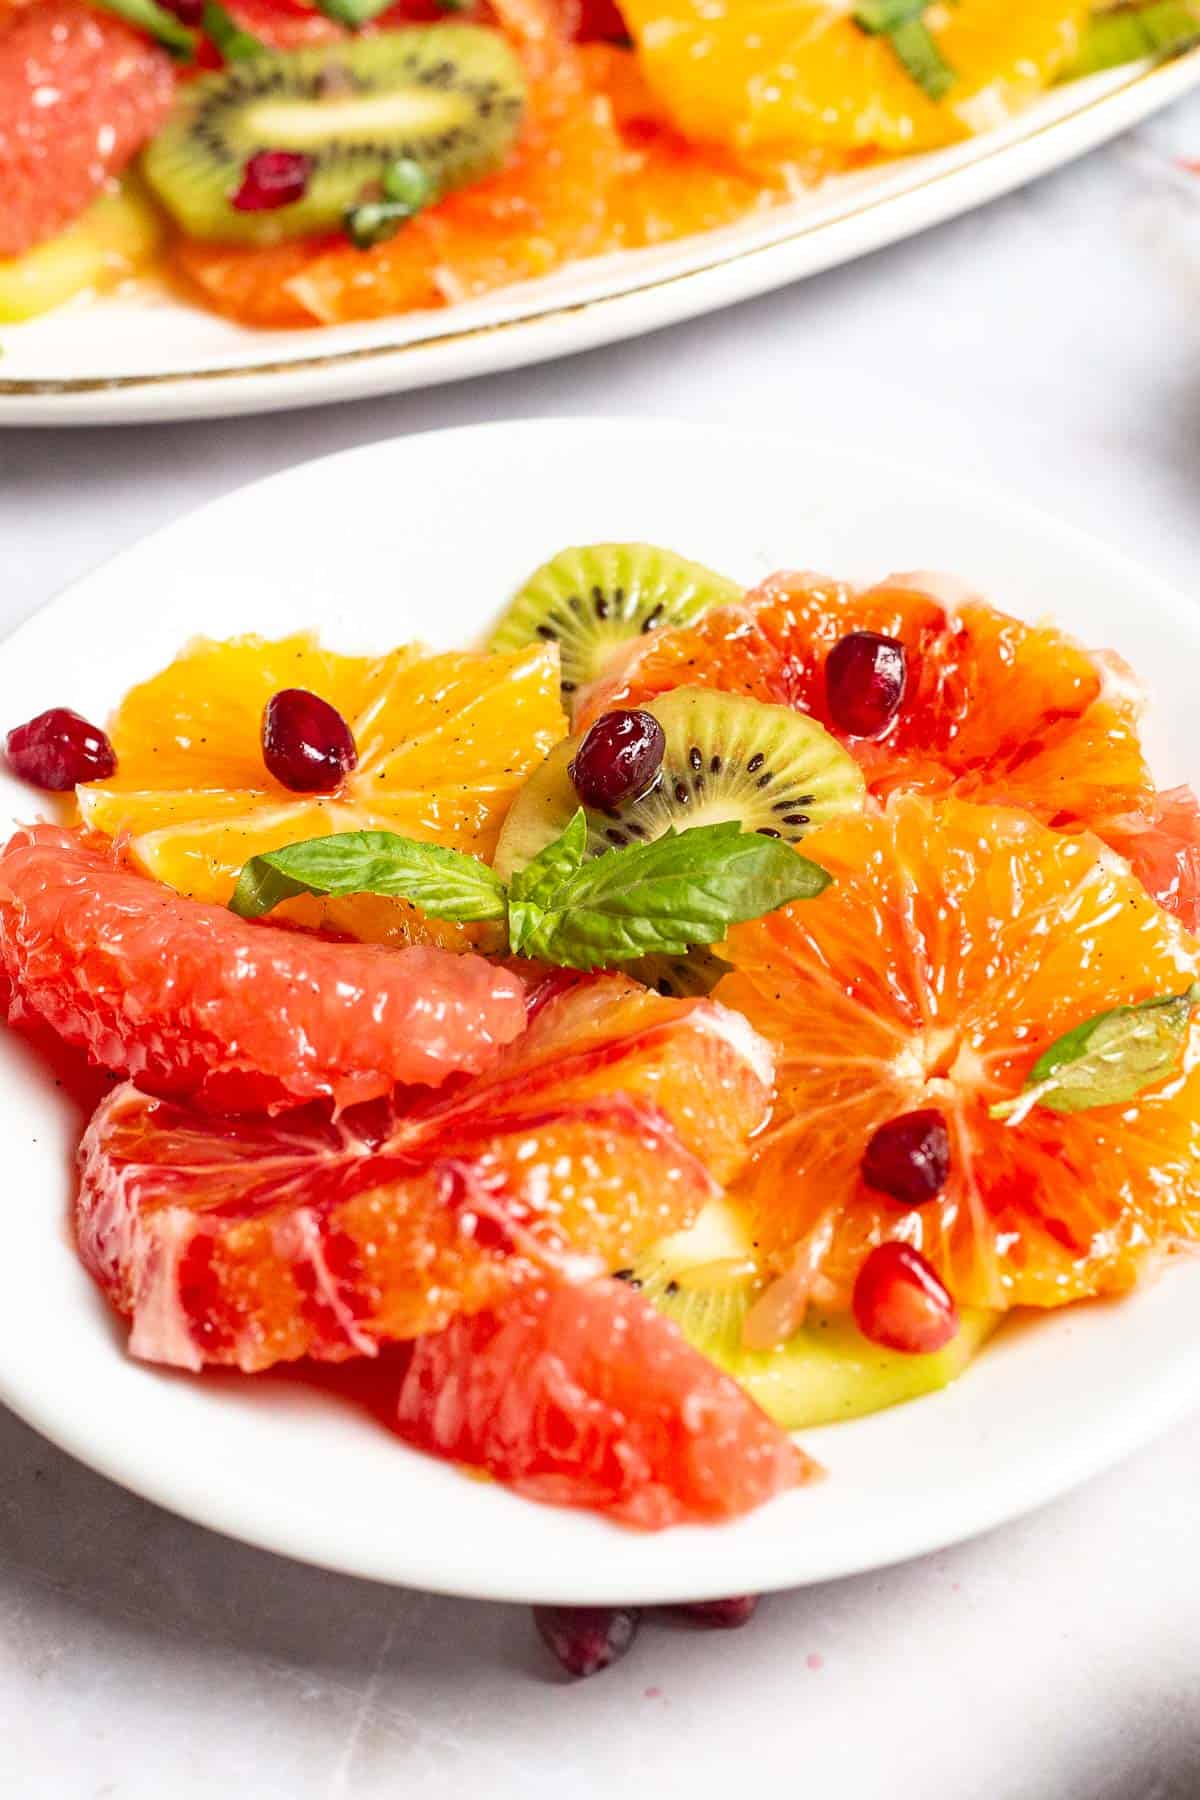 a close up of a serving of citrus salad on a plate.